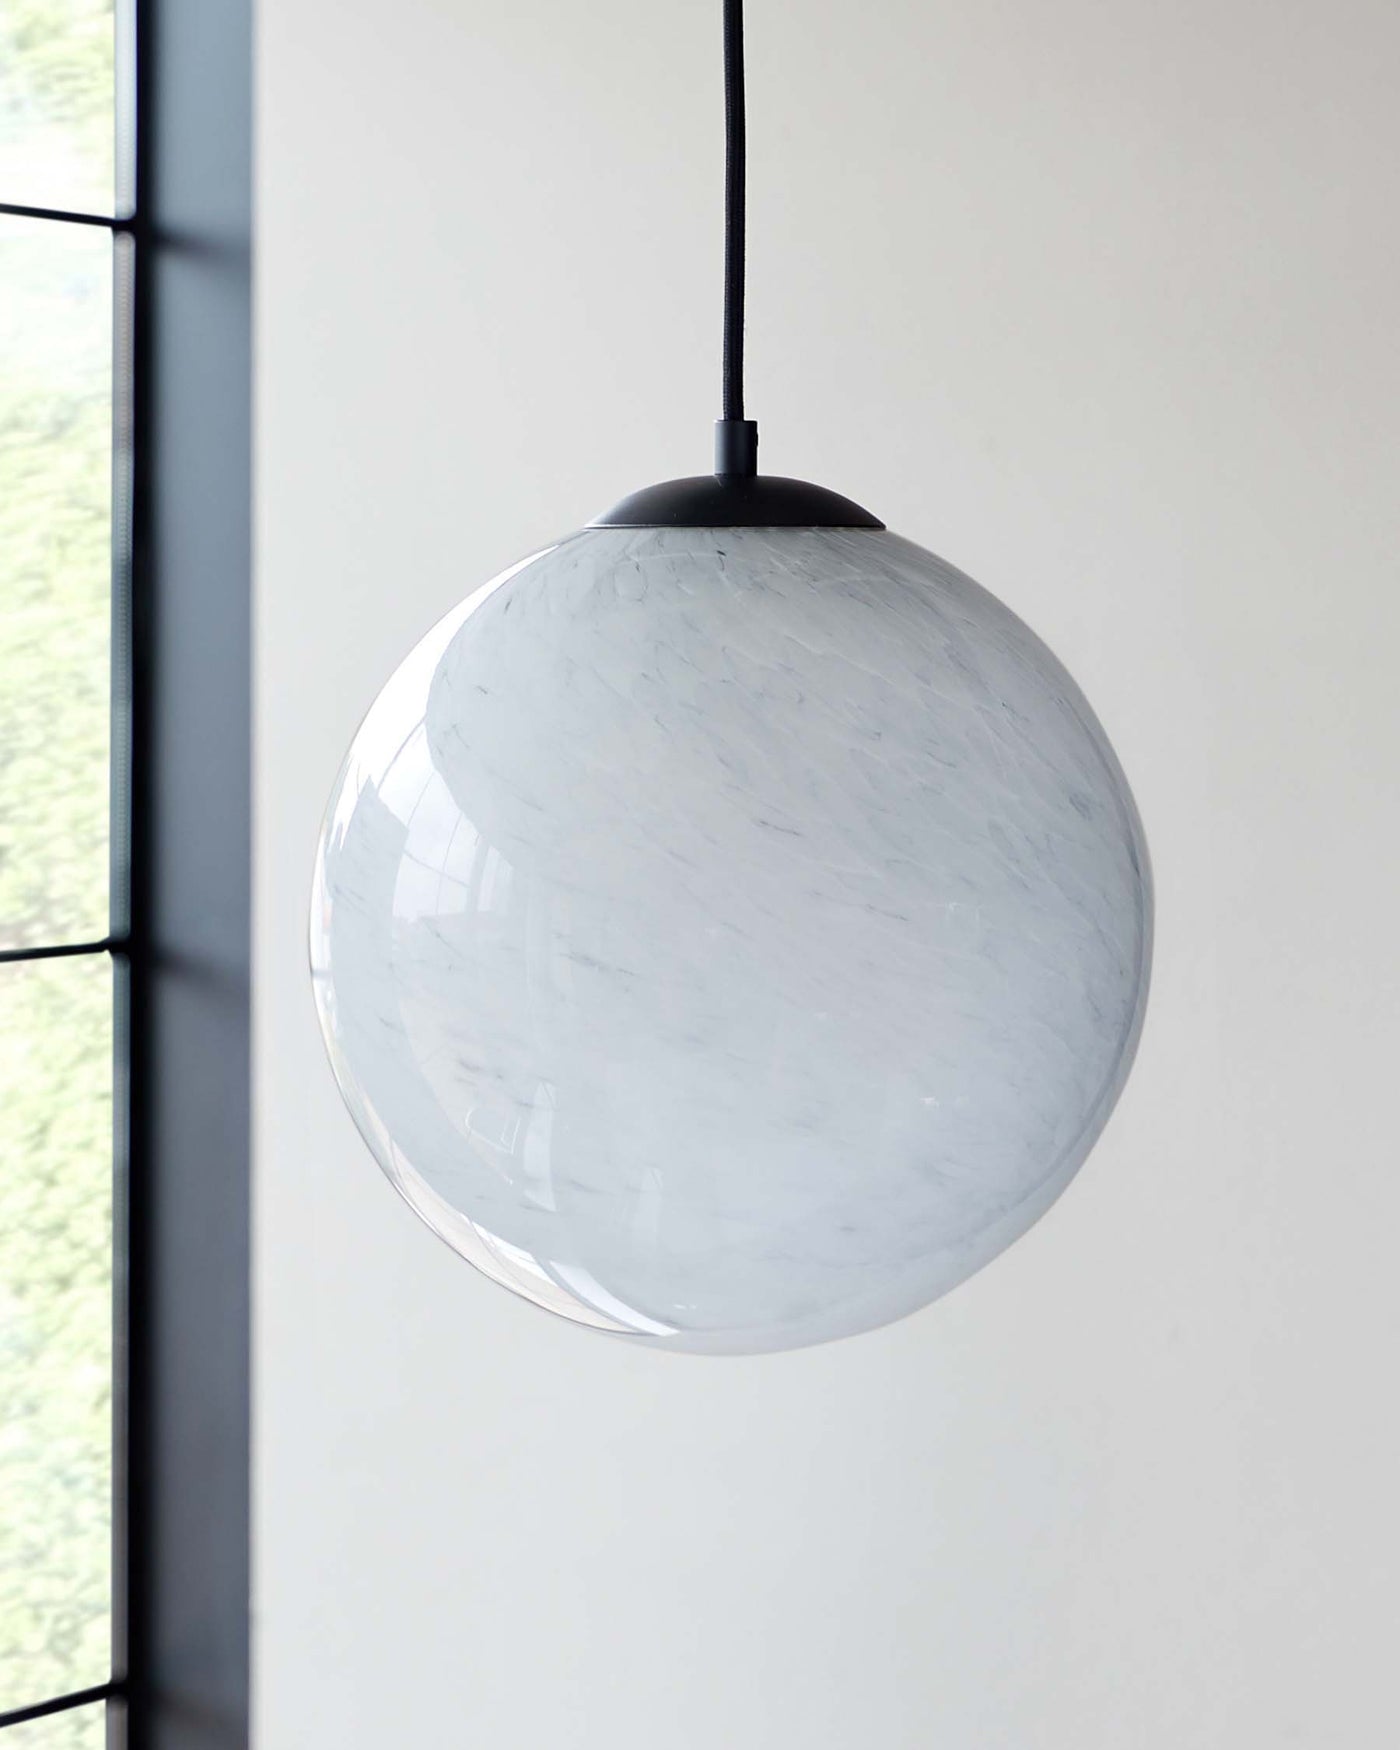 A modern spherical pendant light with a white marble pattern, suspended by a black cord against a neutral background with large windows giving a glimpse of greenery outside.